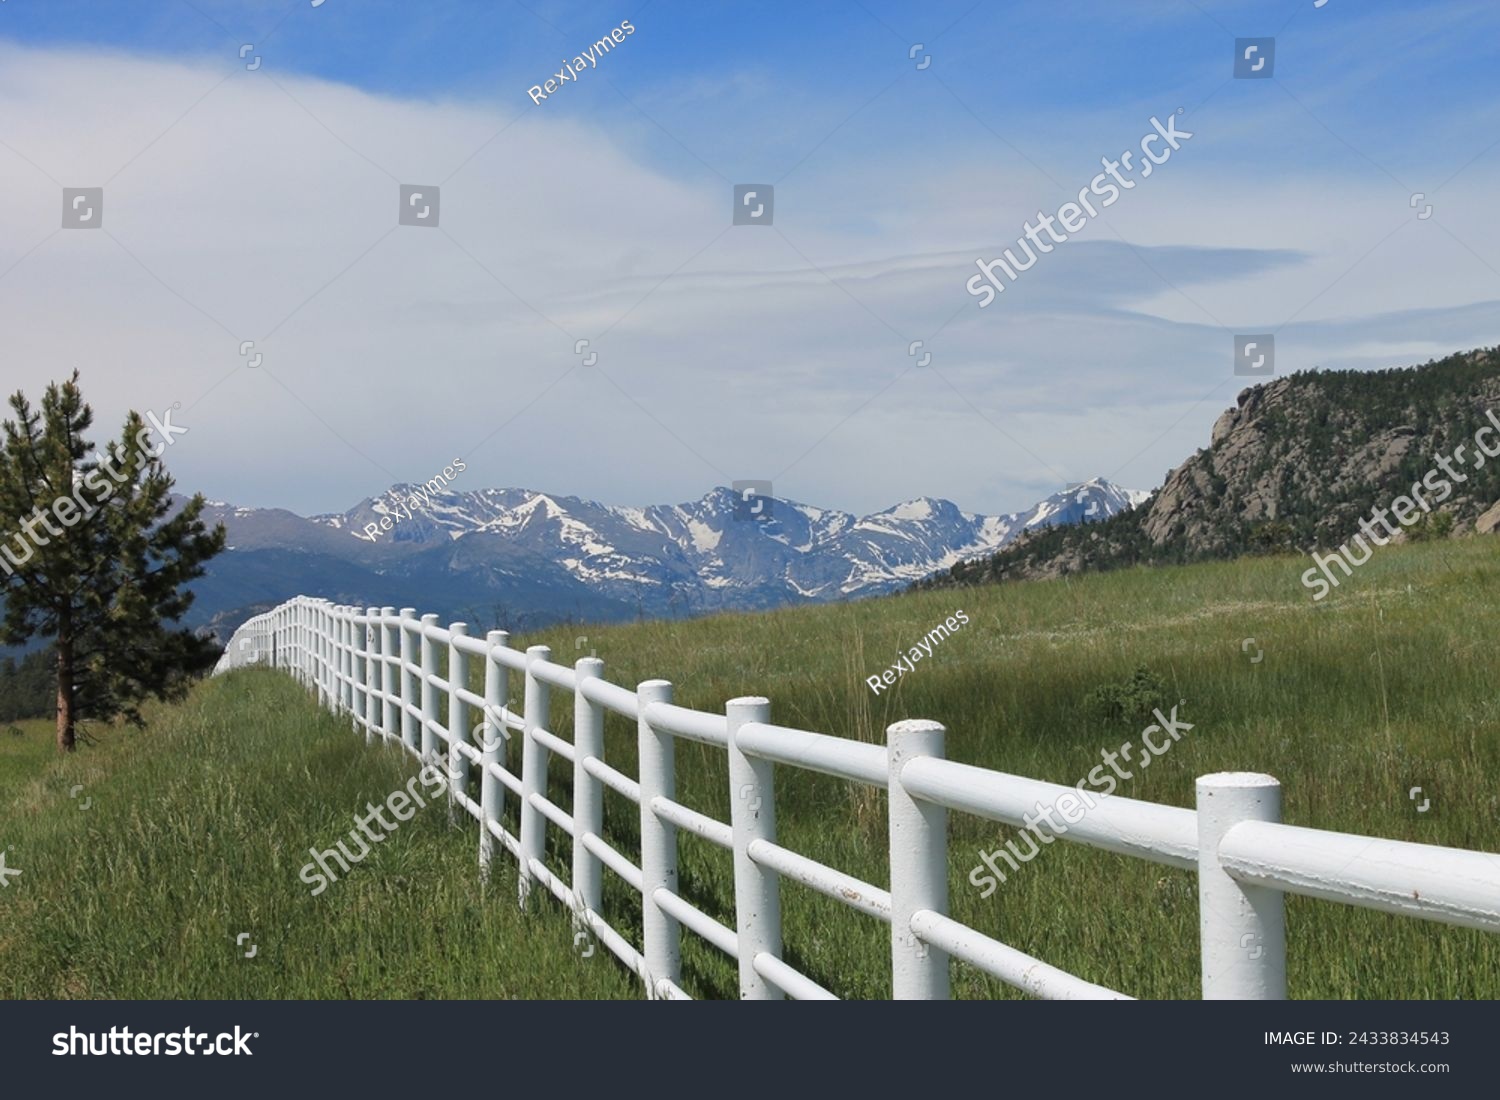 White rail fence with green grass and mountains in background.  Colorado high country scene of rural area.  Blue sky and white clouds. White fence with hills and mountains in the background.   #2433834543